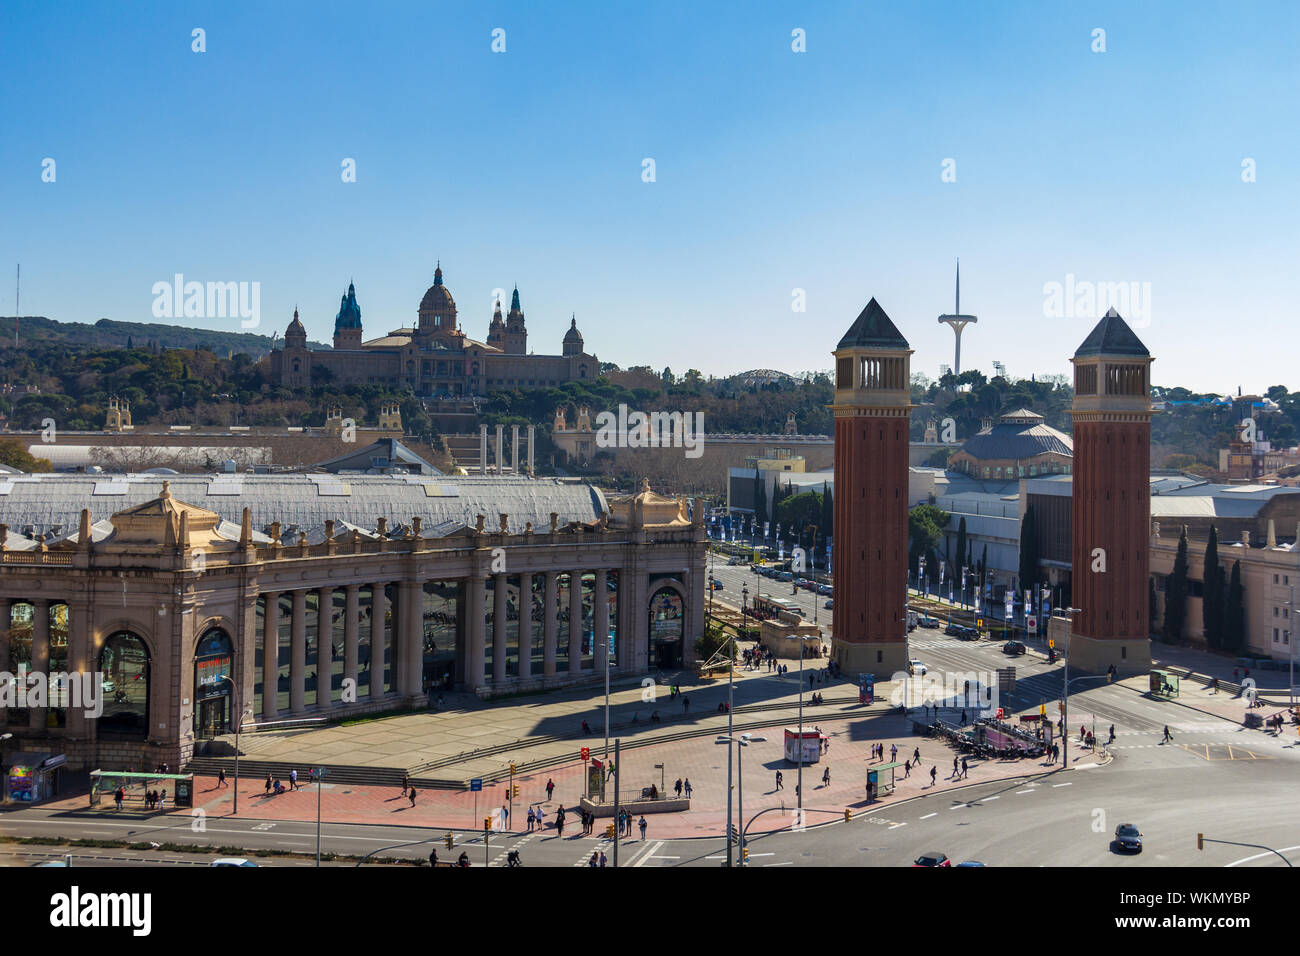 The National Museum of Contemporary Art (MNAC) in Barcelona, Spain as viewed from the roof of Barcelona Arena mall Stock Photo